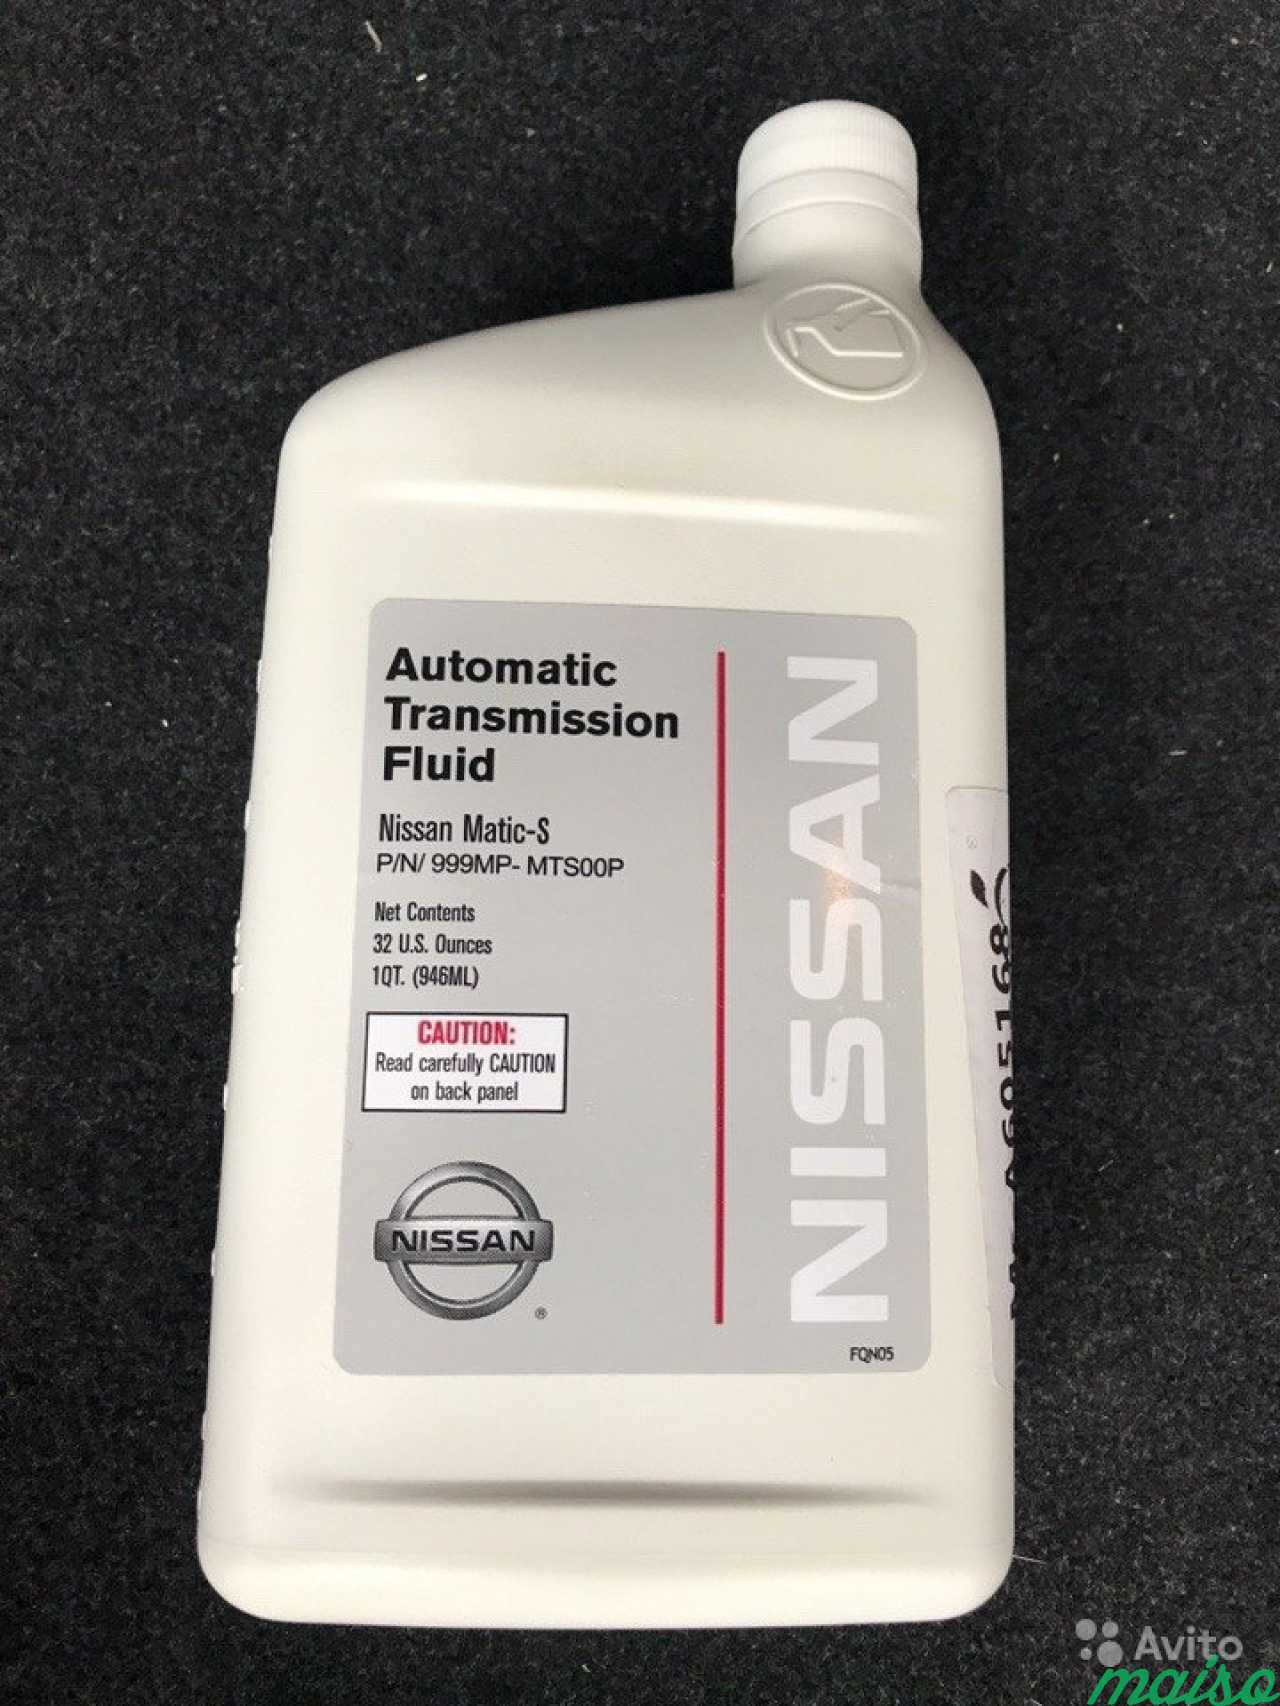 Масло nissan atf matic. Nissan Automatic transmission Fluid matic-s. Nissan ATF matic s Fluid артикул. Nissan ATF matic-s 999mp-mts00-p. Nissan matic s 1л артикул.